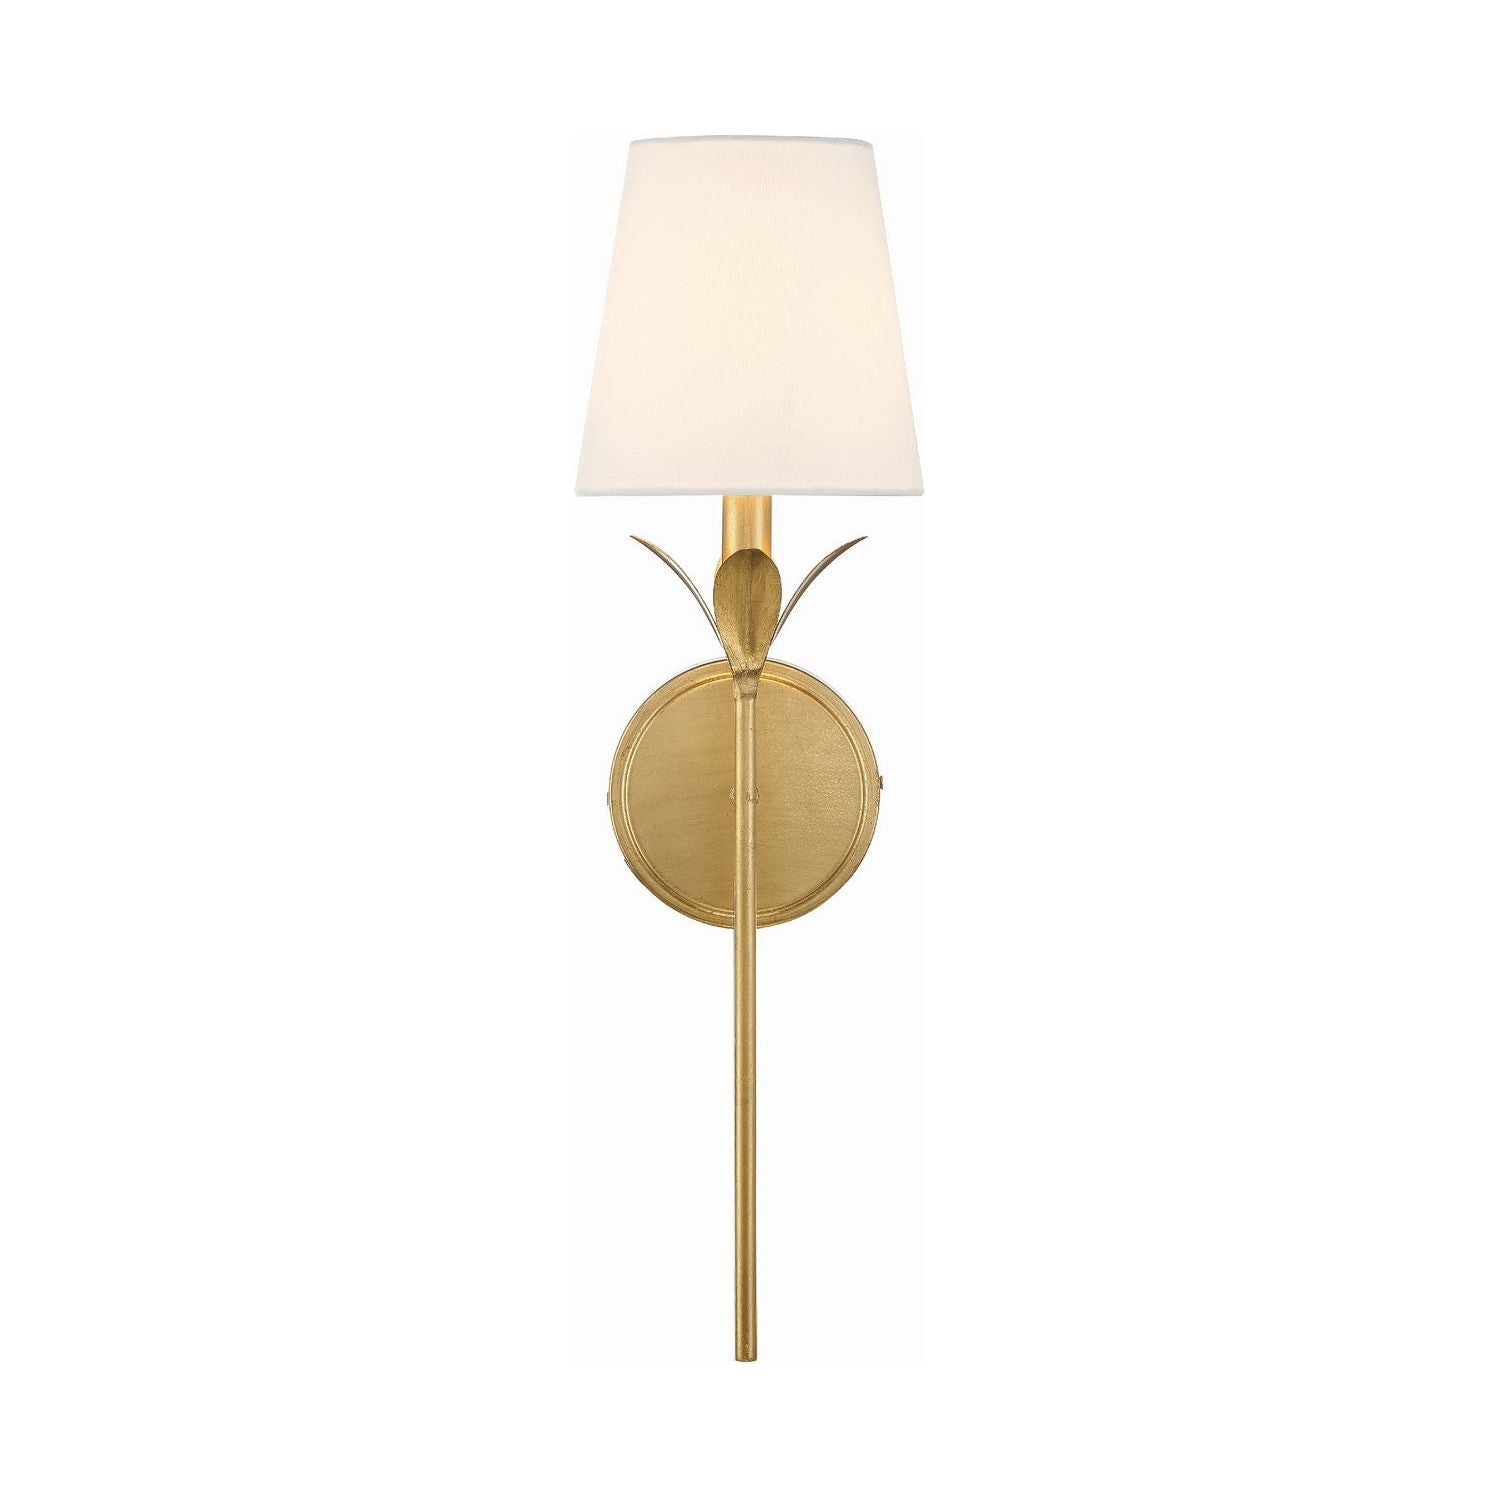 Crystorama - 531-GA - One Light Wall Sconce - Broche - Antique Gold